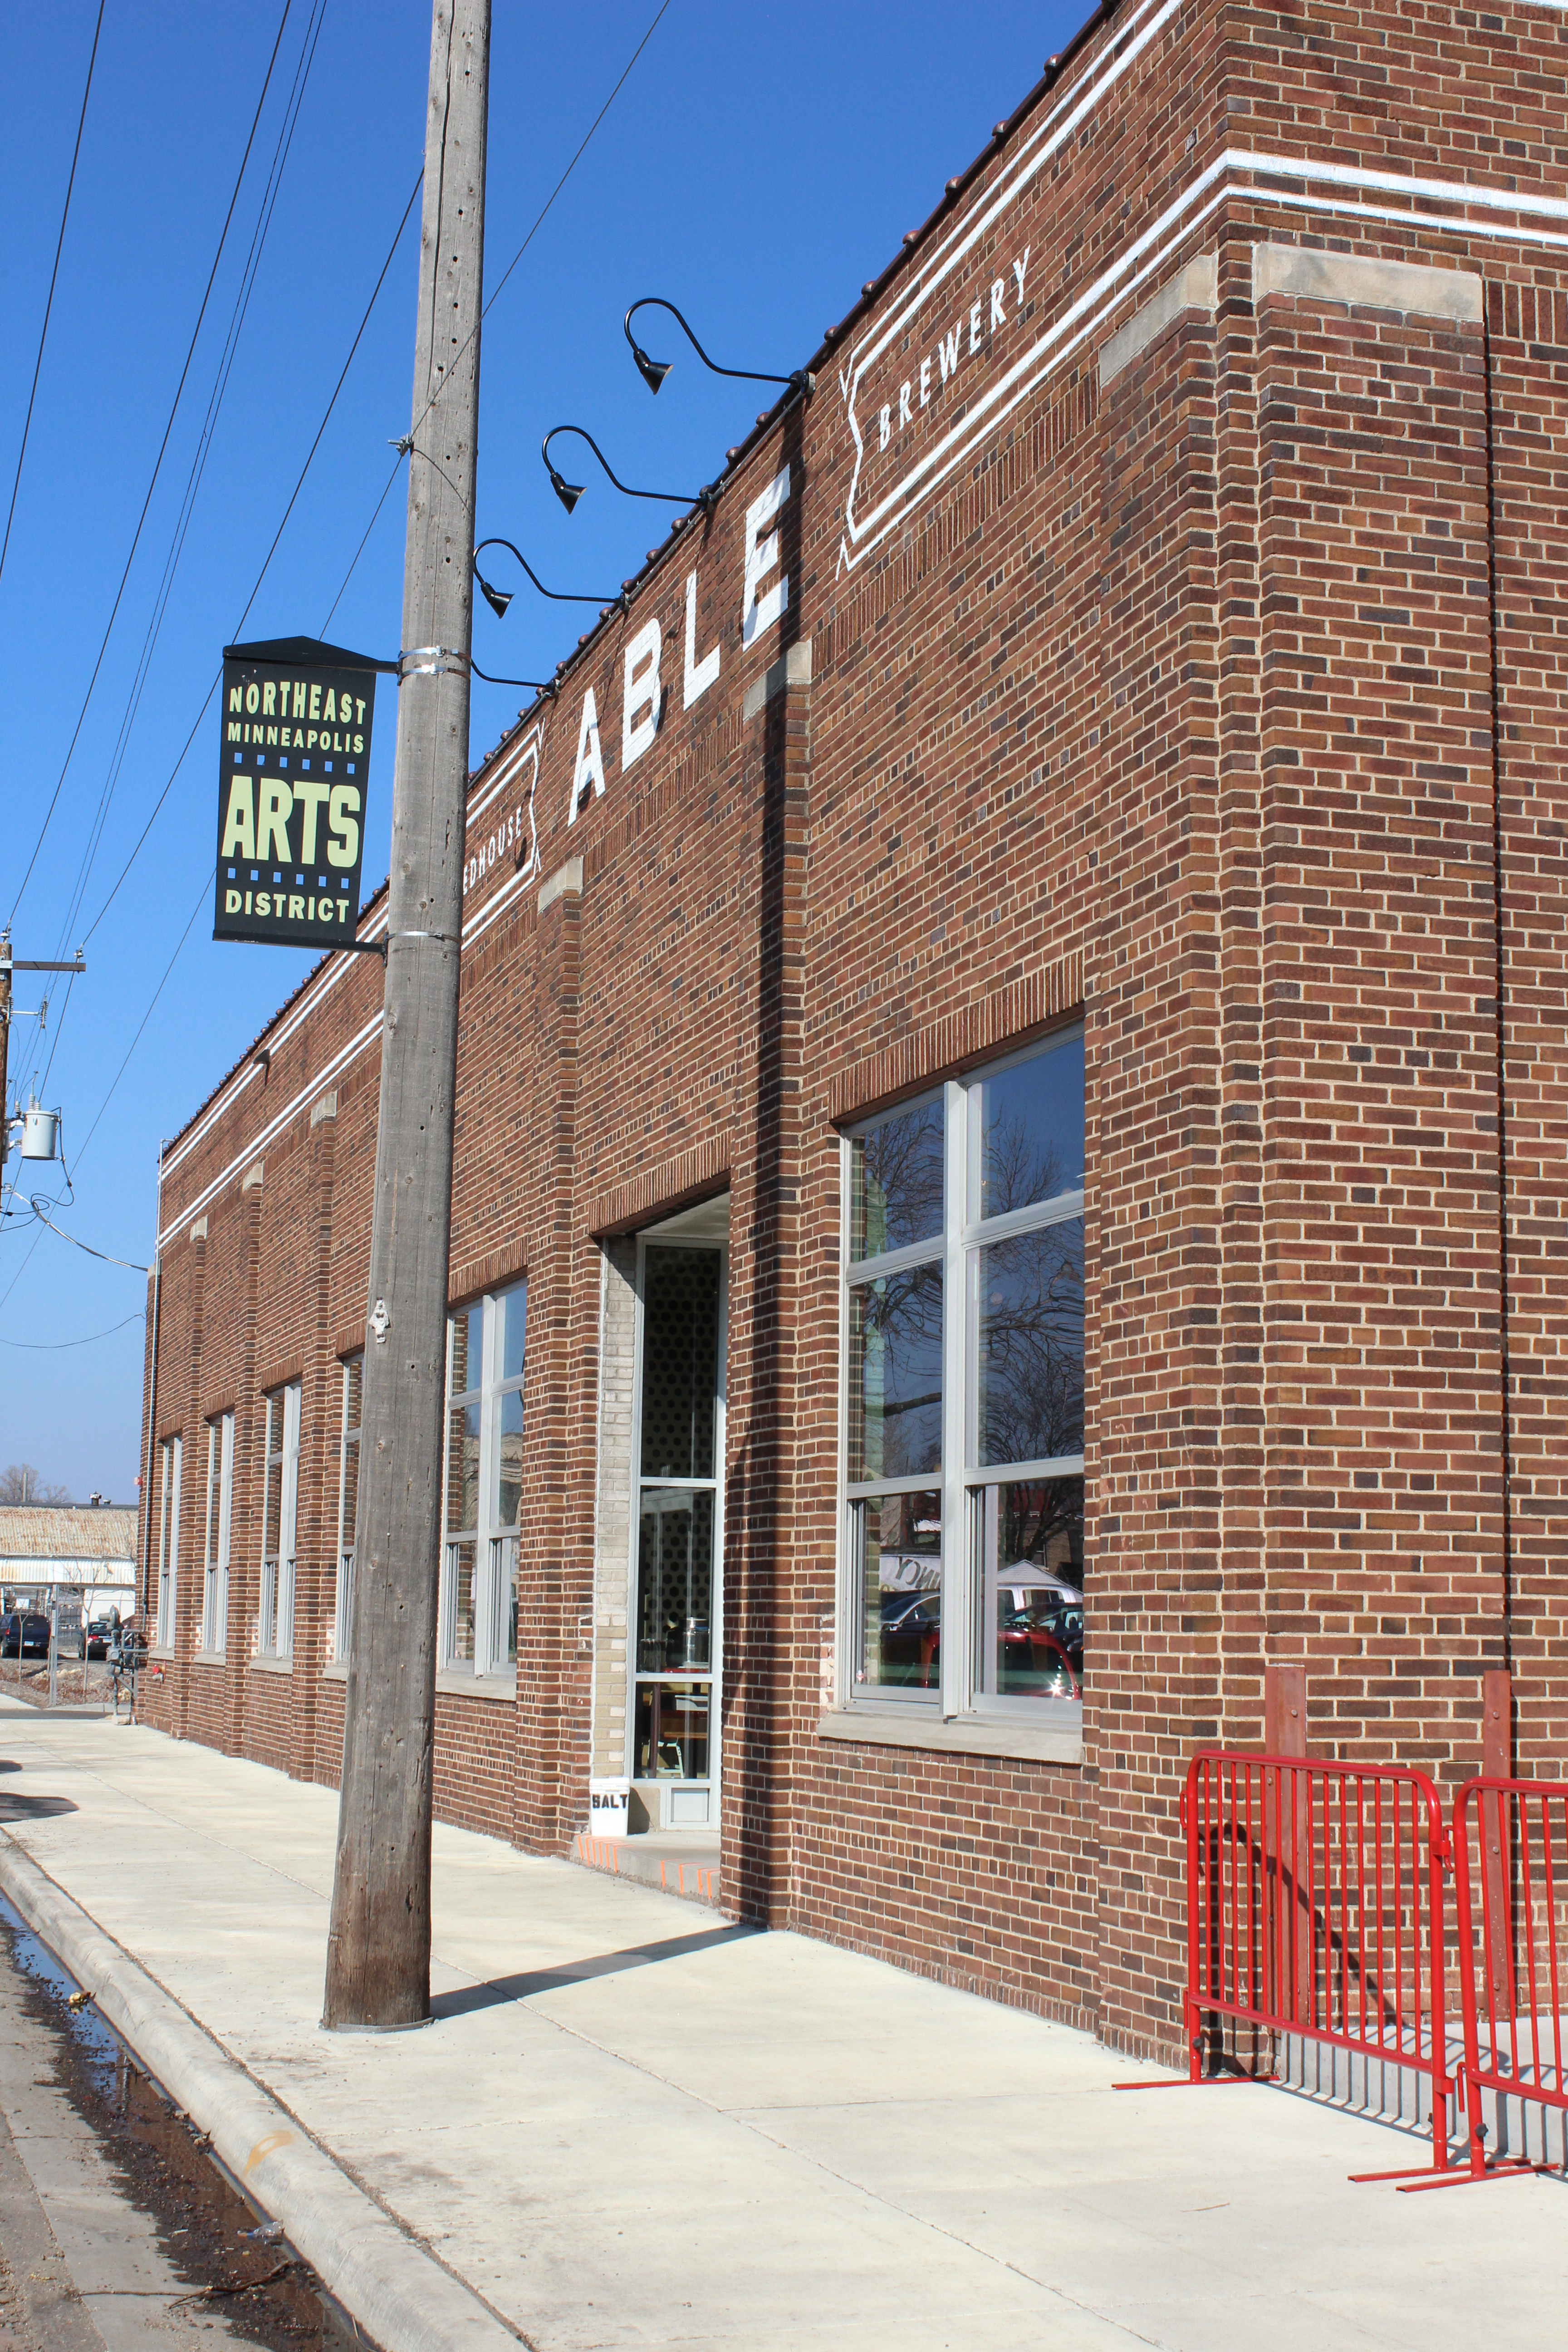 ABLE Brewery storefront and Northeast Minneapolis Arts District signage